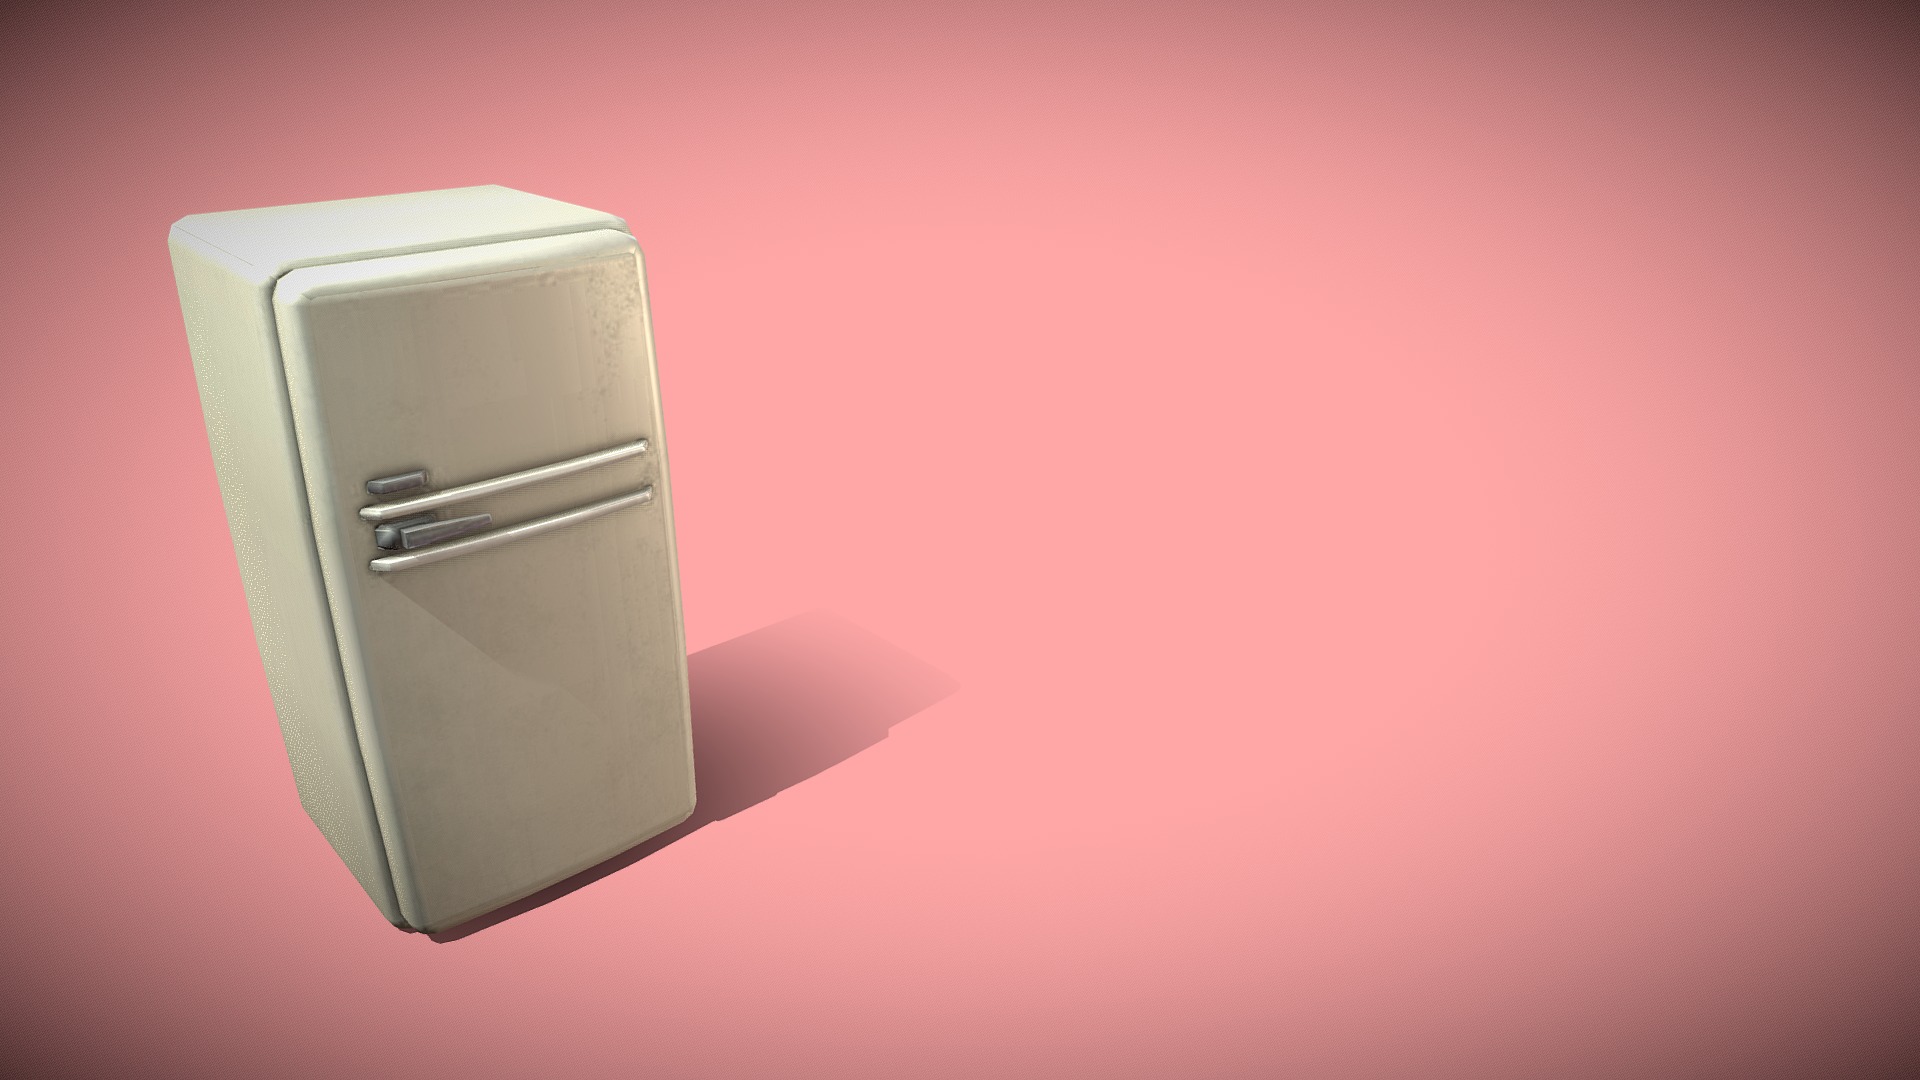 3D model game ready Low Poly Fridge - This is a 3D model of the game ready Low Poly Fridge. The 3D model is about a silver rectangular object.